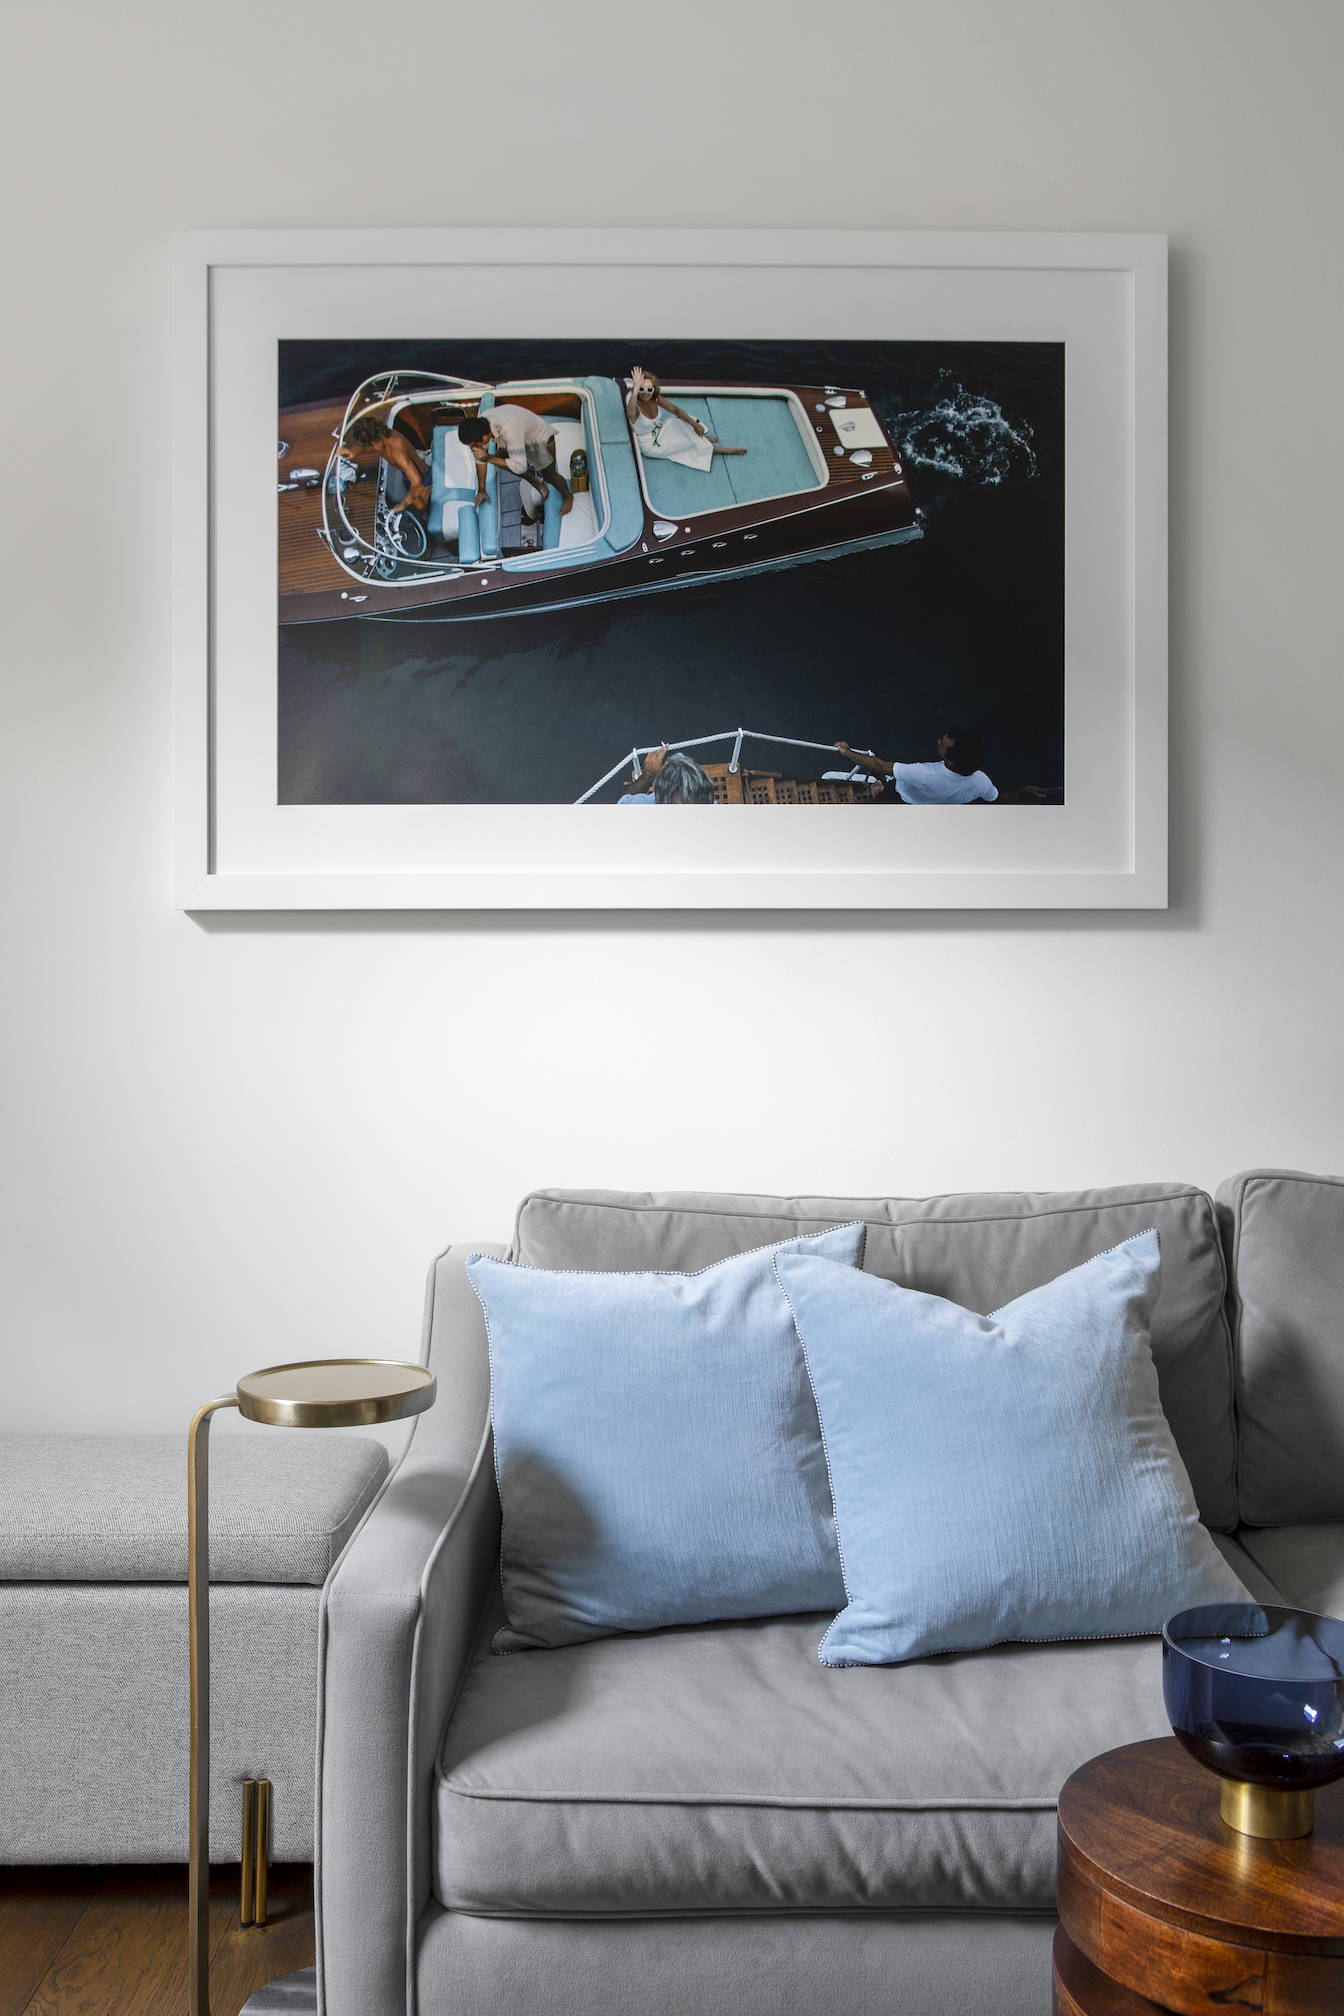 A living room with framed photography above sofa